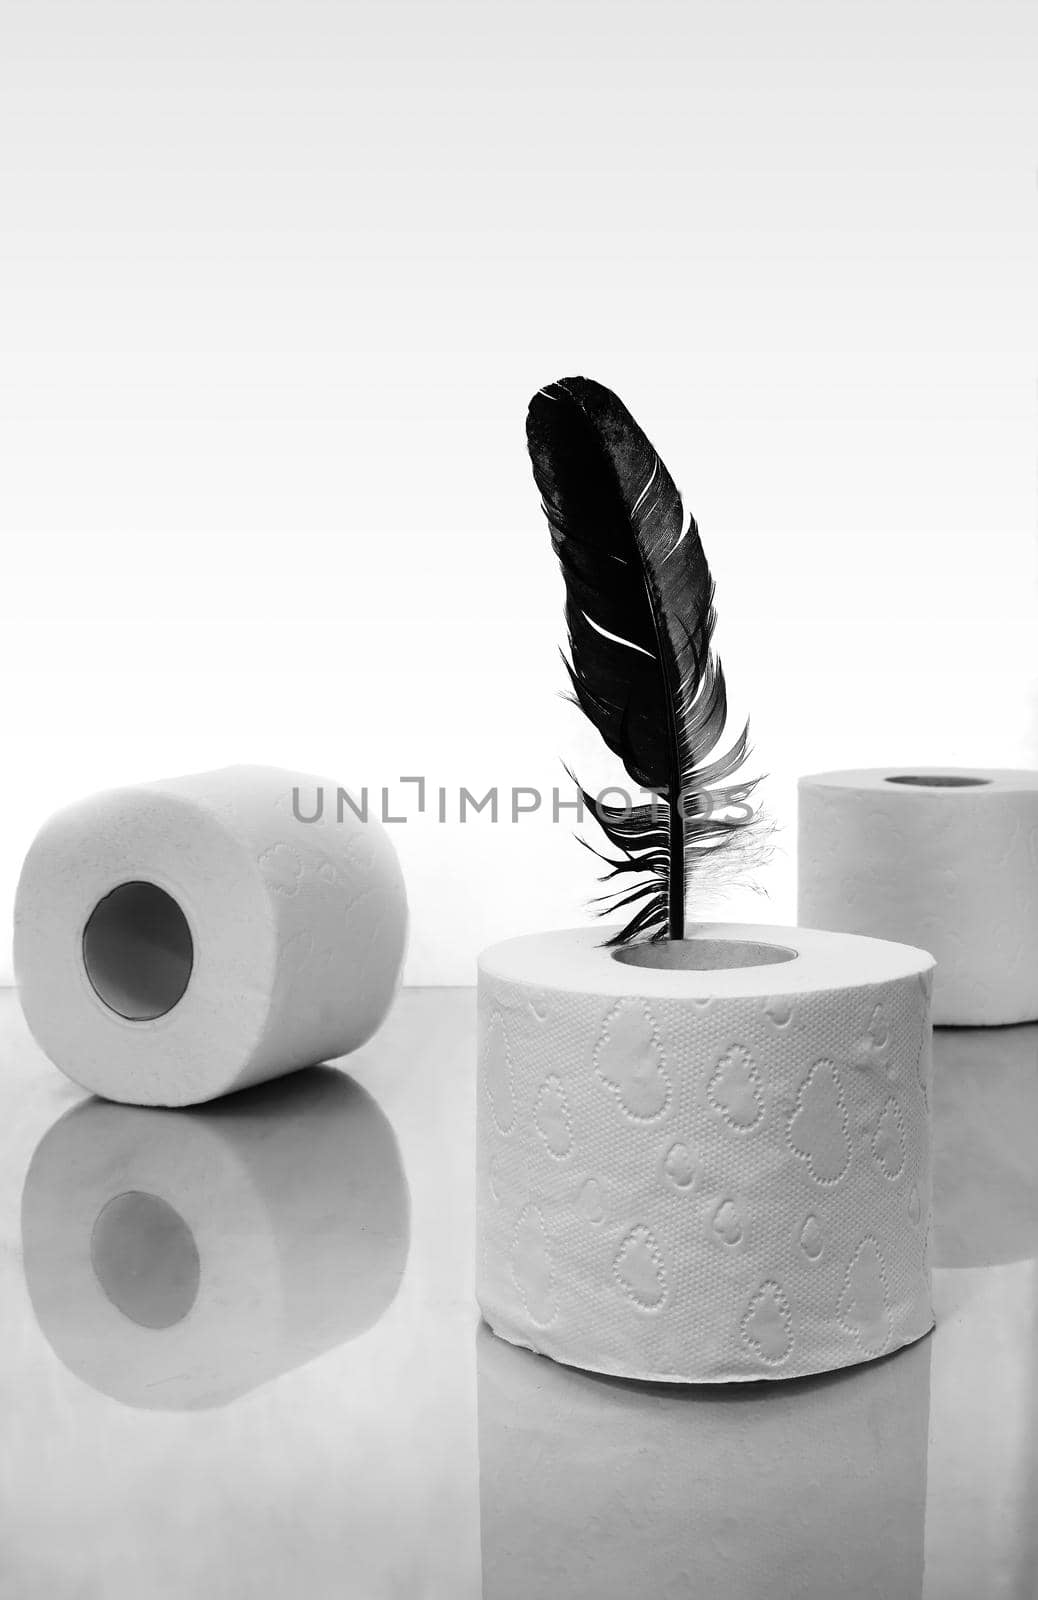 Rolls of soft toilet paper next to a bird's feather are a symbol of a gentle touch. Front view, copy space. Black and white image